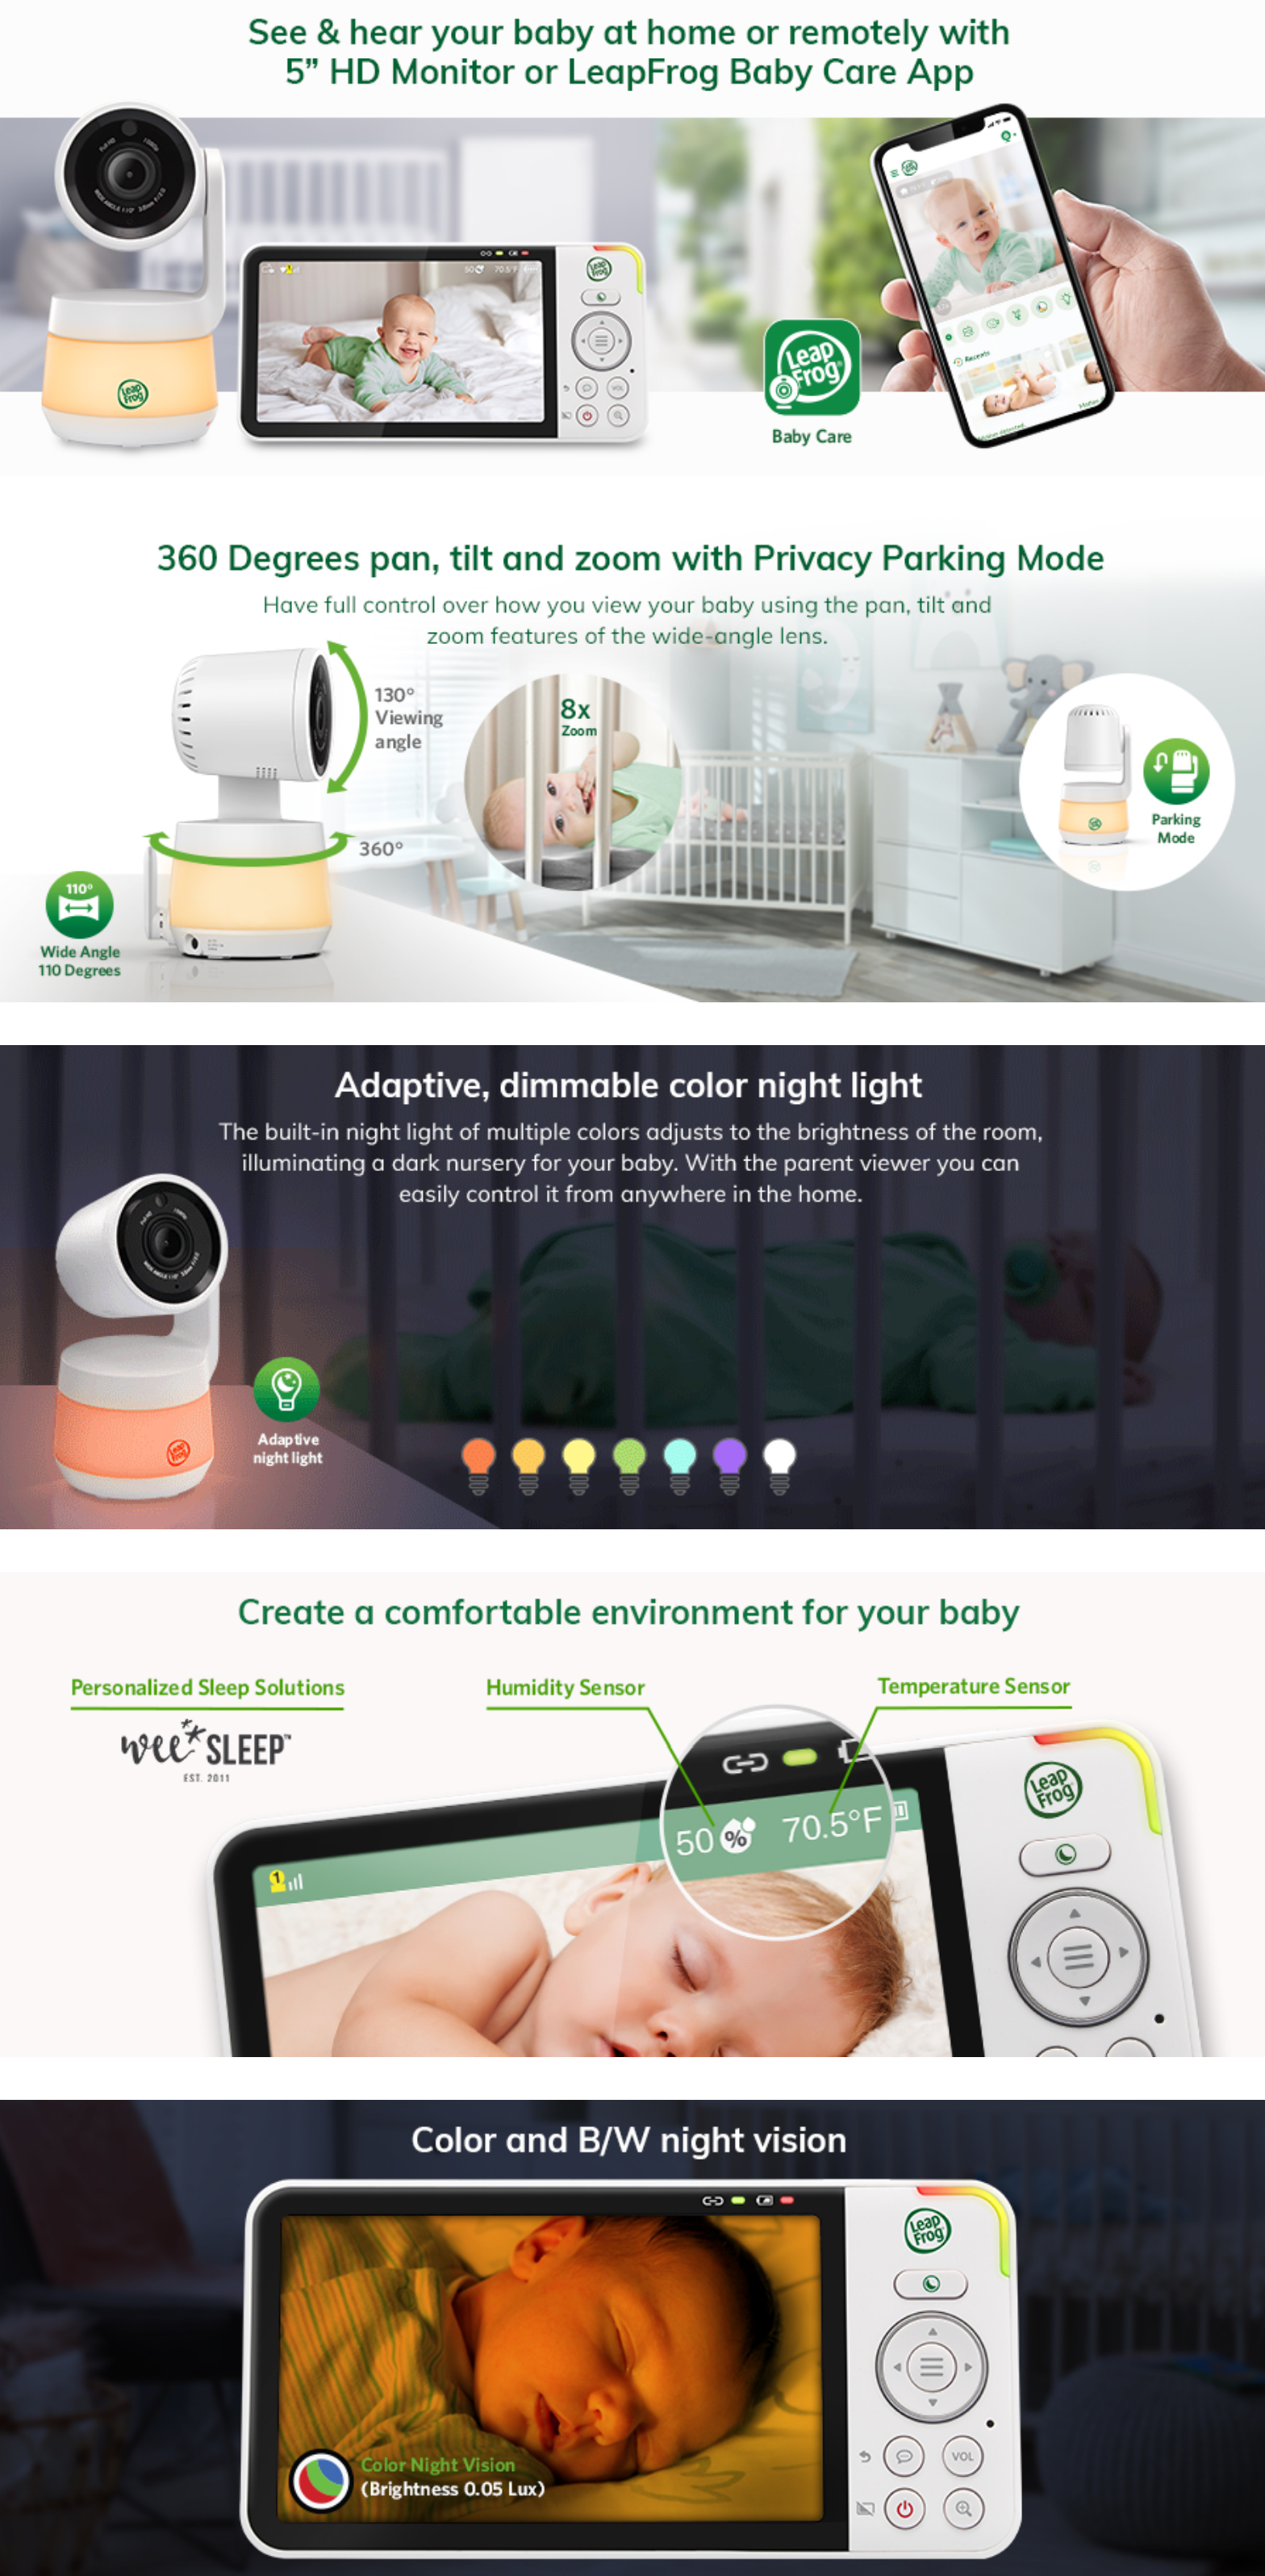 Baby-Monitors-LeapFrog-LF925HD-2-2-Camera-HD-Pan-and-Tilt-Video-with-Remote-Access-Baby-Monitor-1